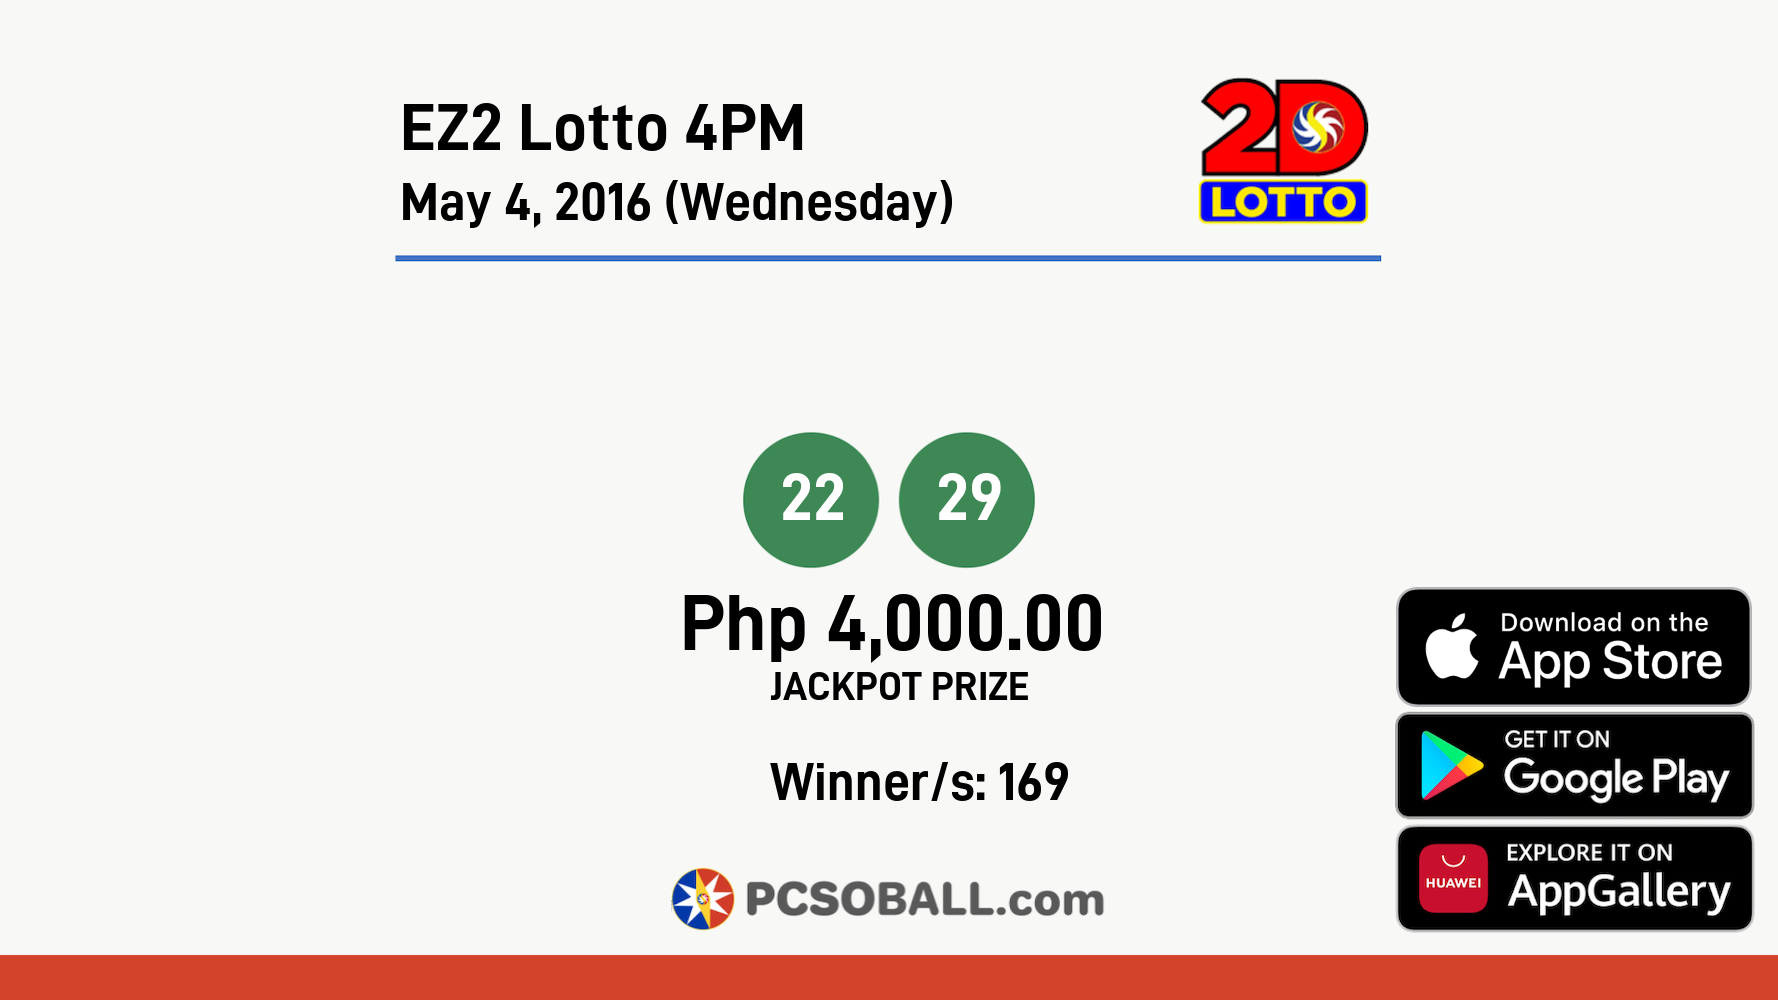 EZ2 Lotto 4PM May 4, 2016 (Wednesday) Result